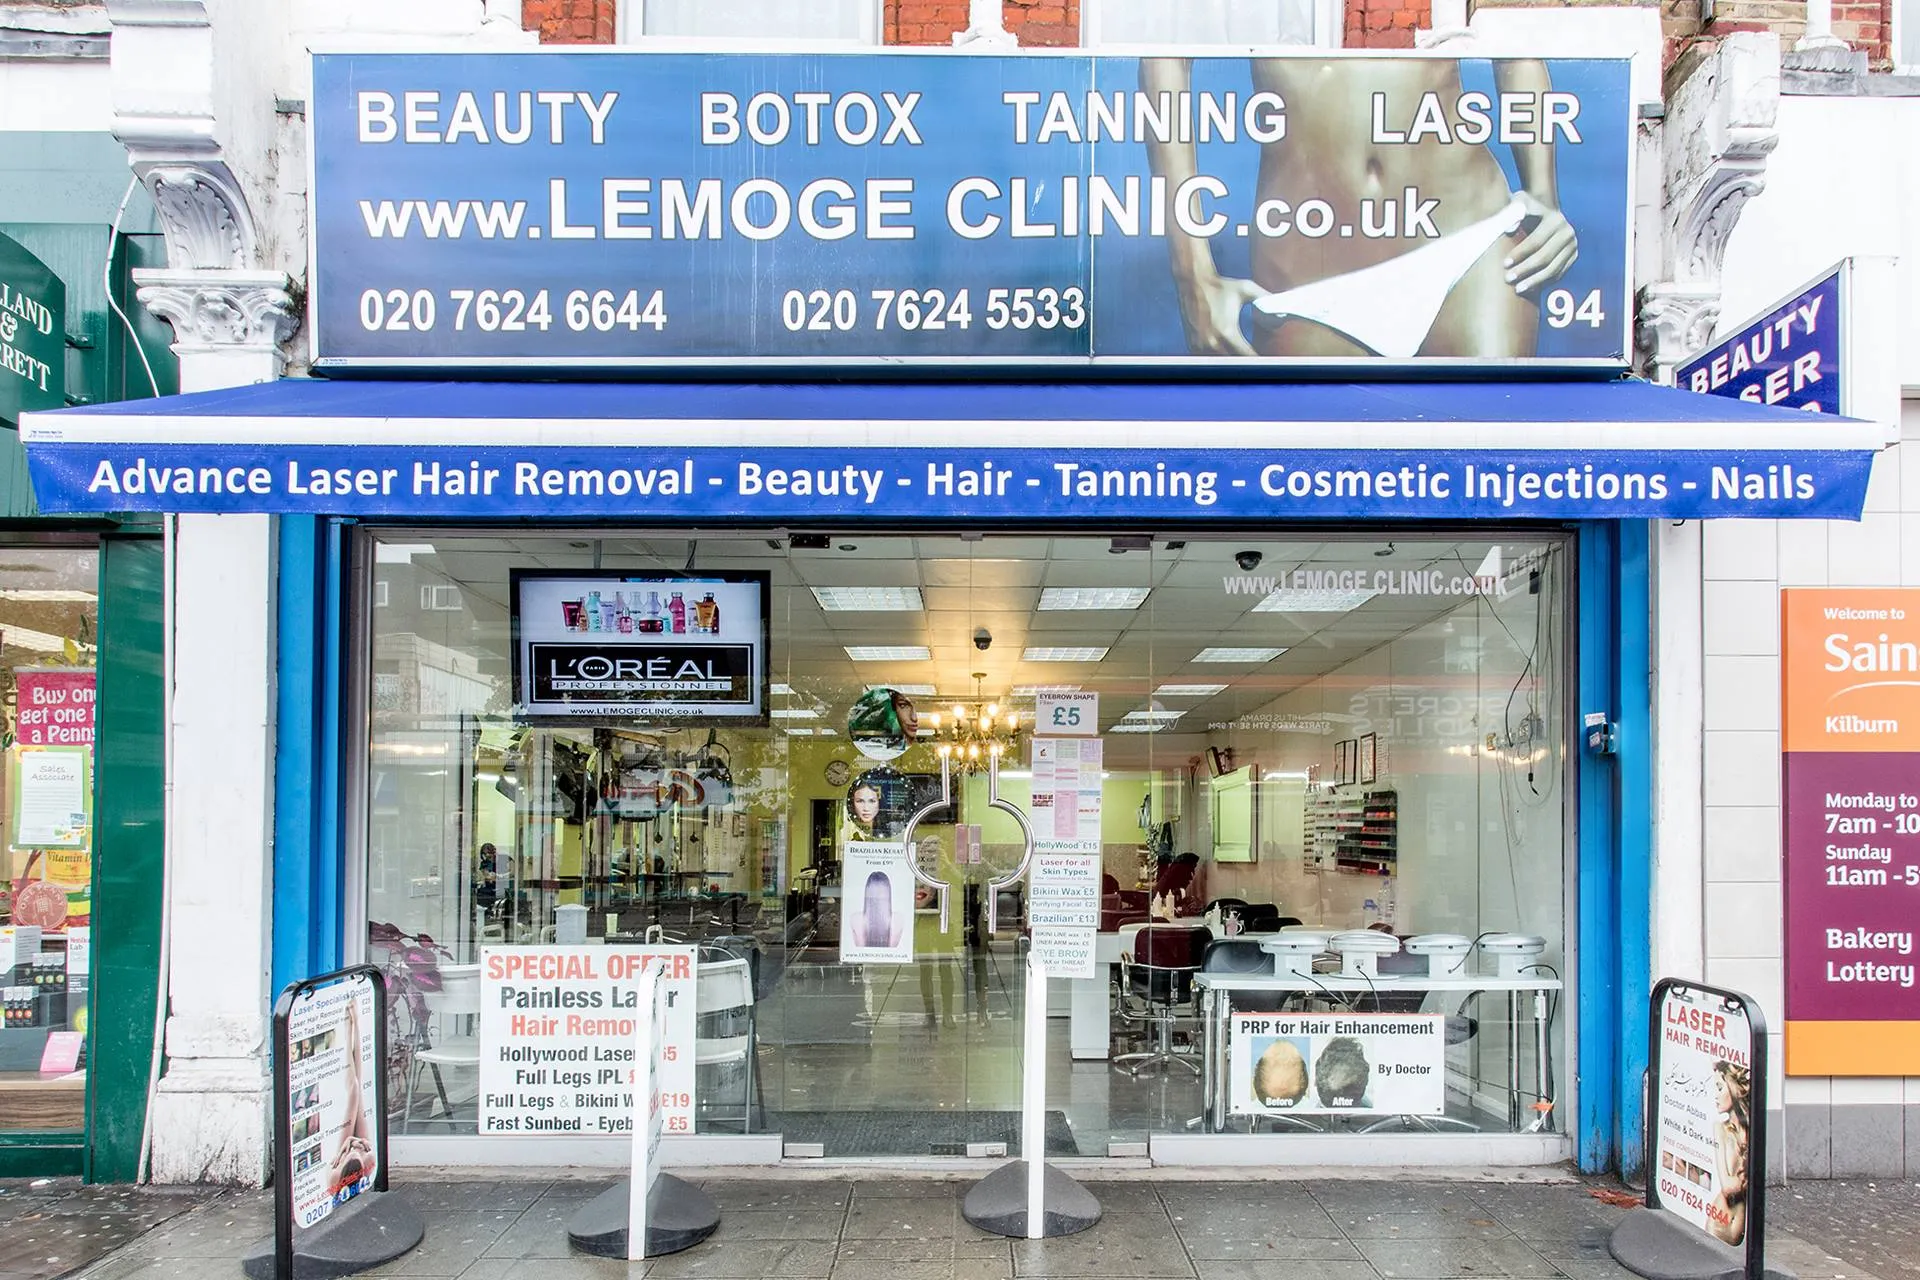 Lemoge Clinic in United Kingdom, Europe | Tanning Salons - Rated 4.7